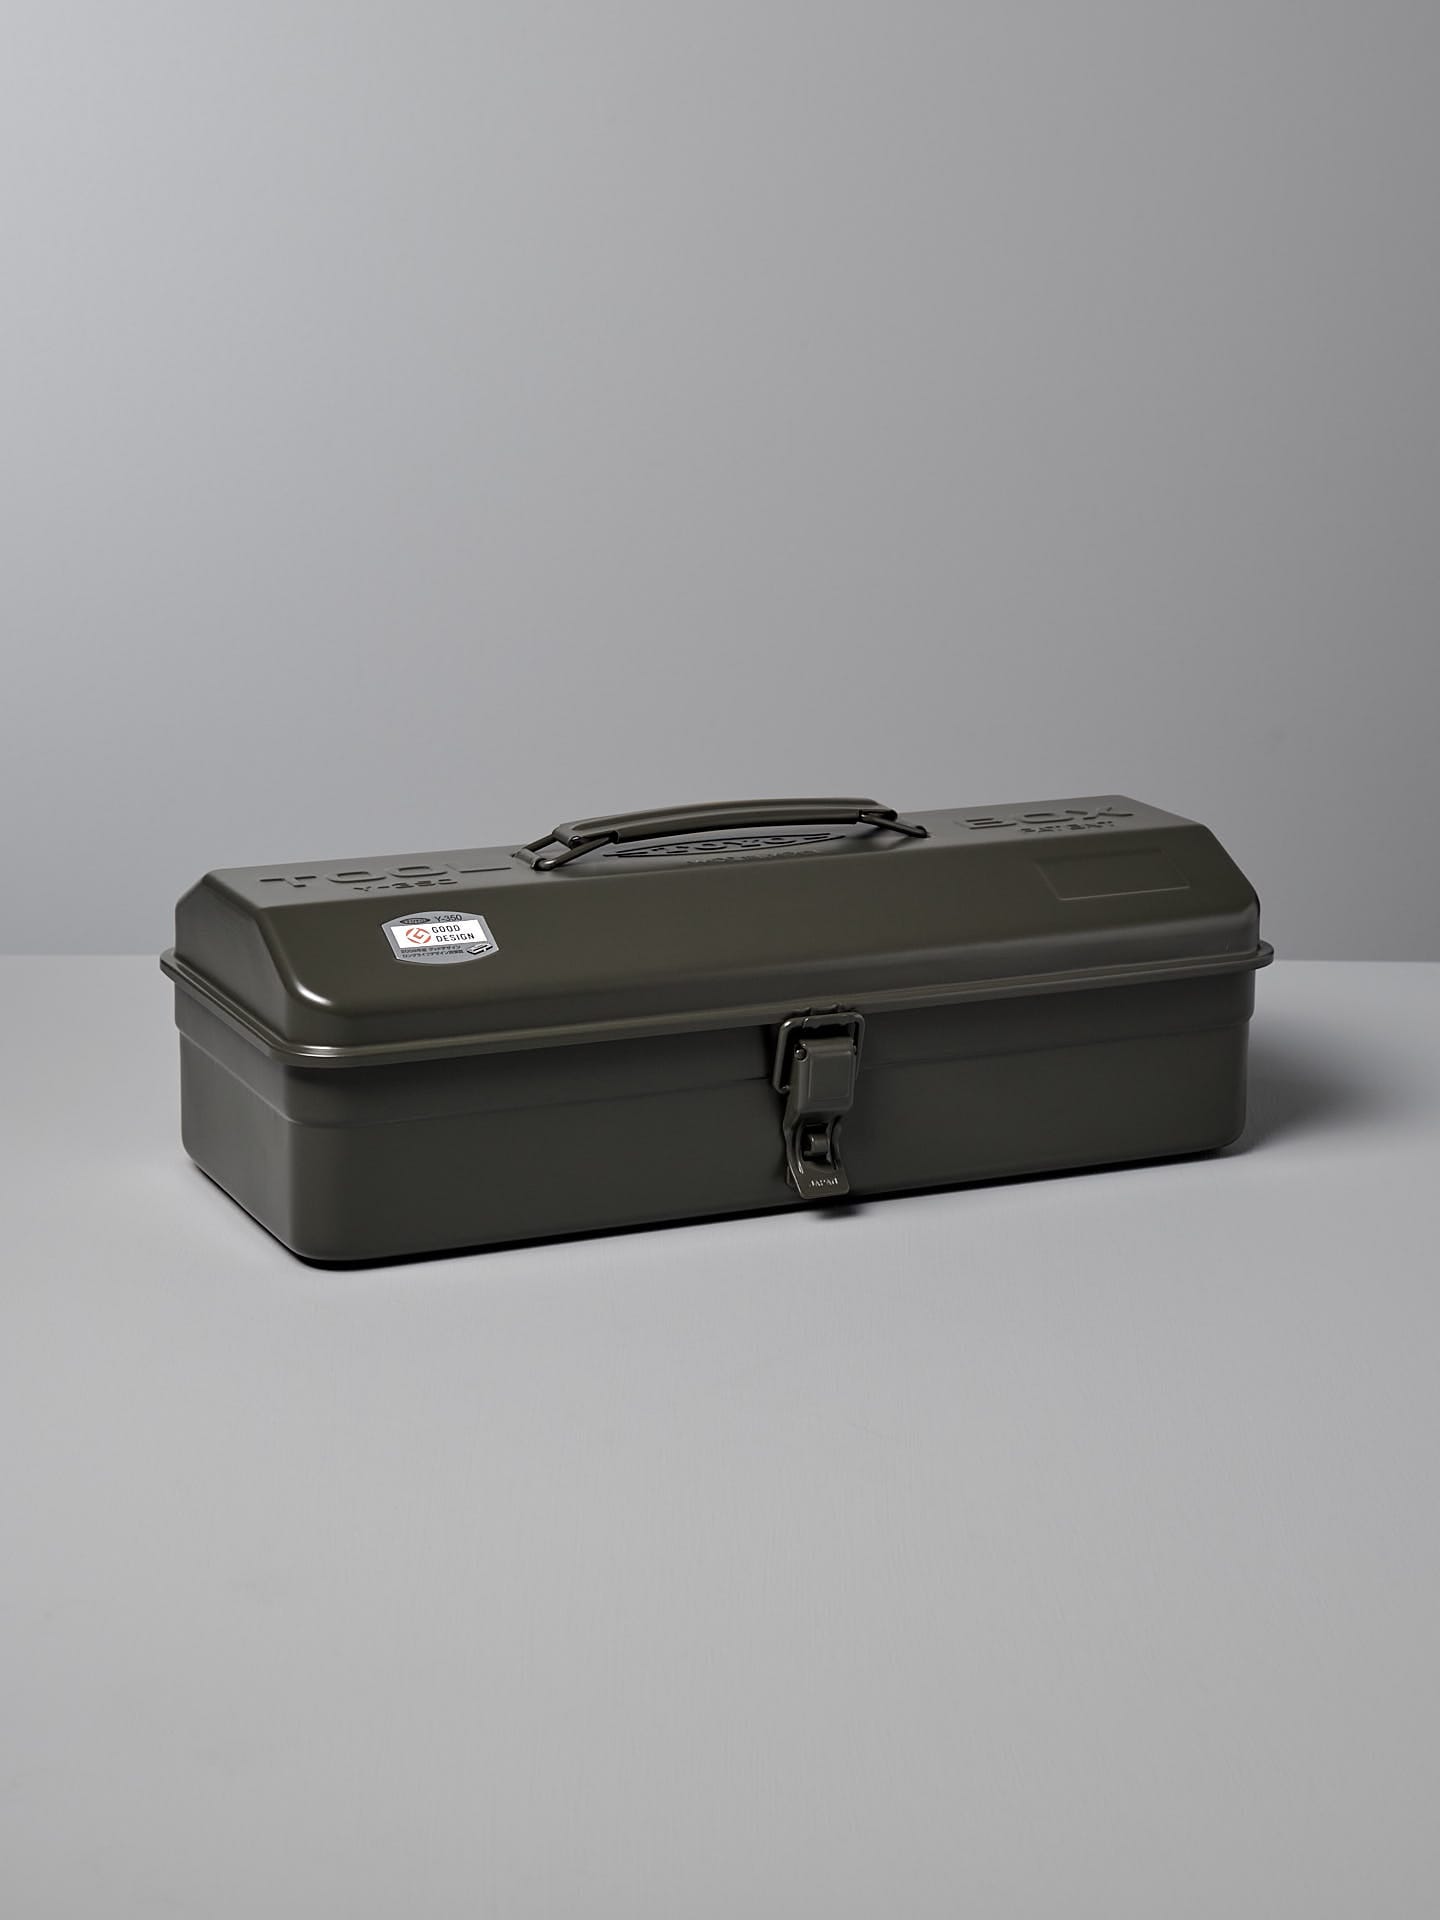 A closed, rectangular, dark green metal Camber-Top Toolbox Y-350 – Moss Green made by TOYO STEEL in Japan with a handle and a latch, sits on a light grey surface.